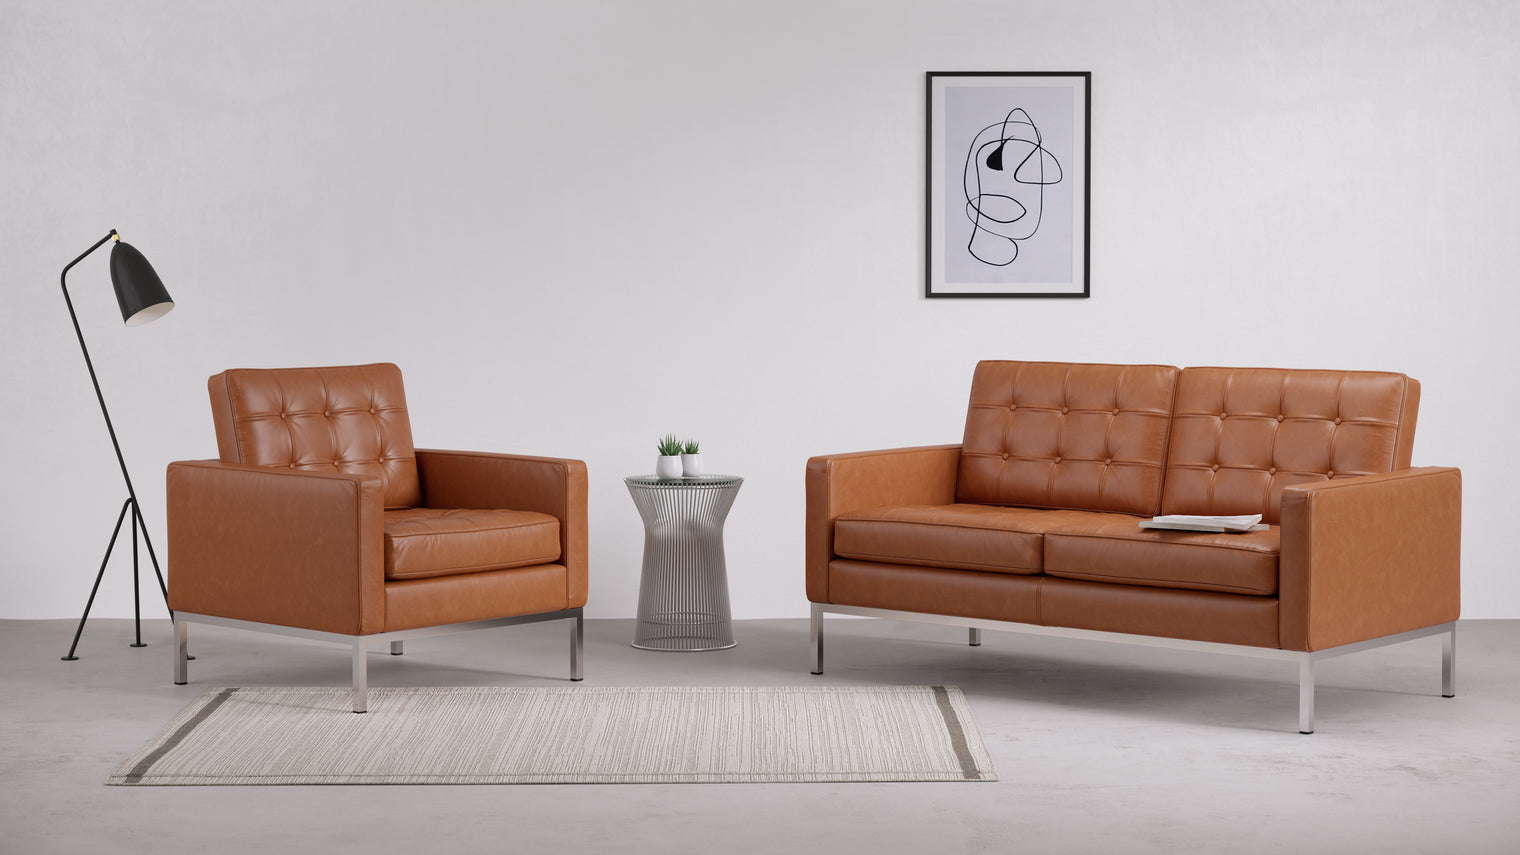 Florence - Florence Two Seater Sofa, Tan Premium Leather